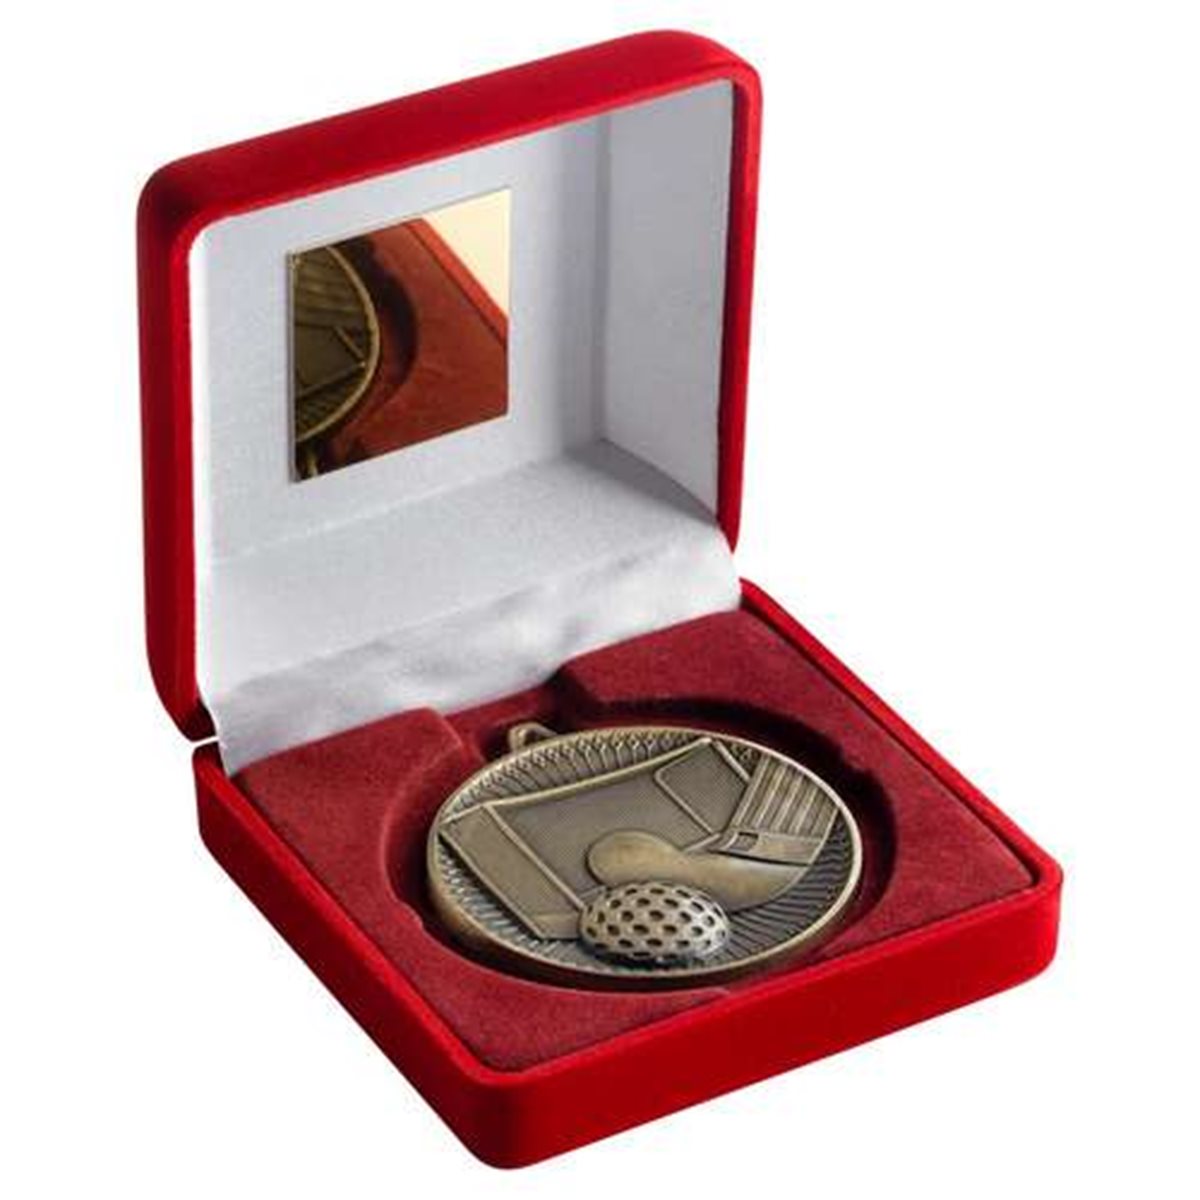 Hockey 60mm Gold Boxed Medal JR18-TY84A